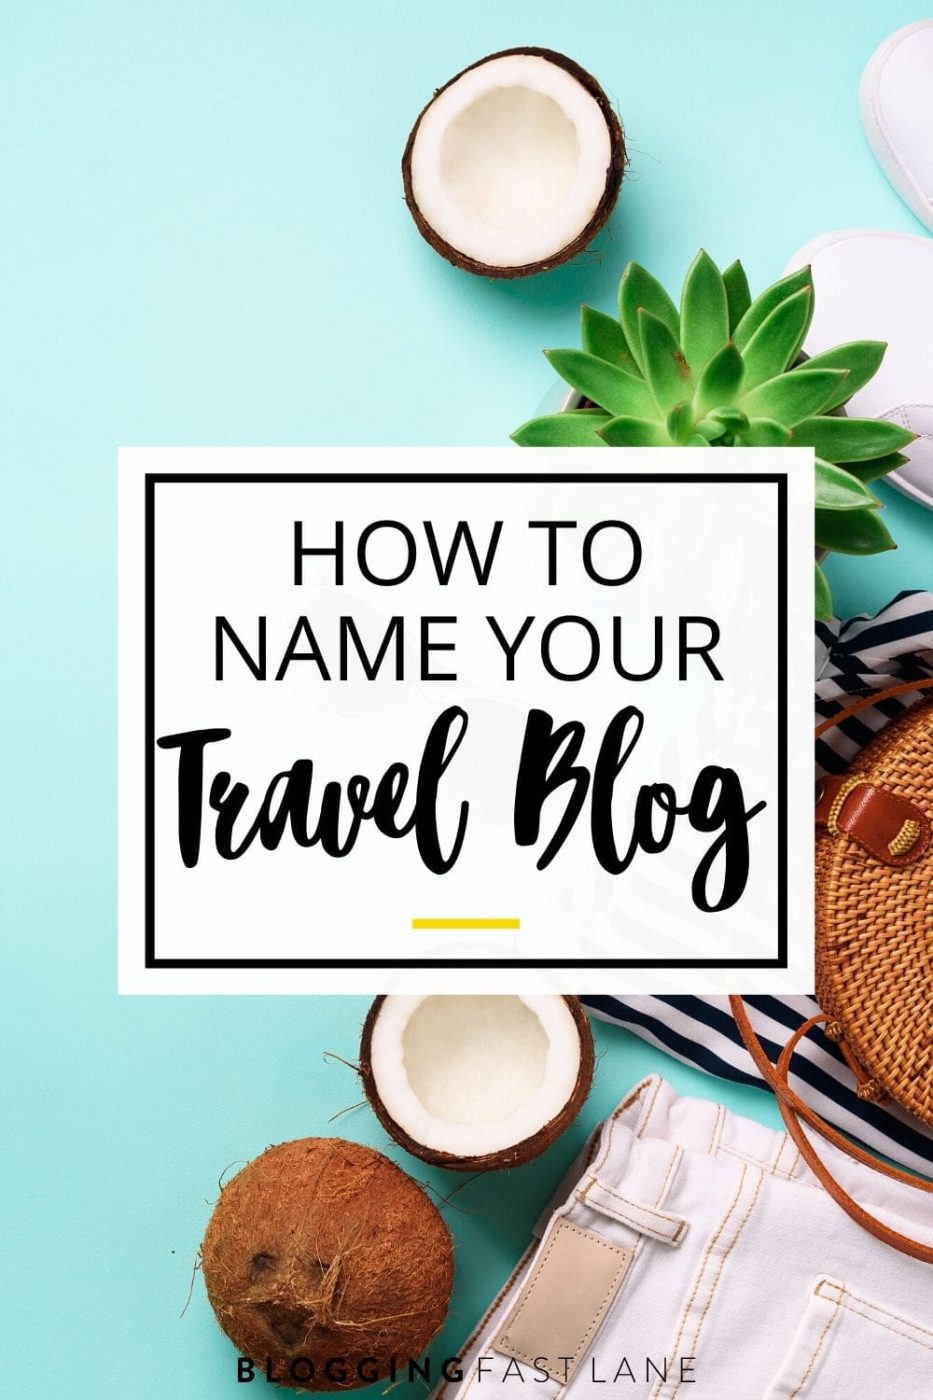 Travel Blog Name Ideas | Searching for the perfect travel blog name? Click here to read our complete guide, plus travel blog name ideas!